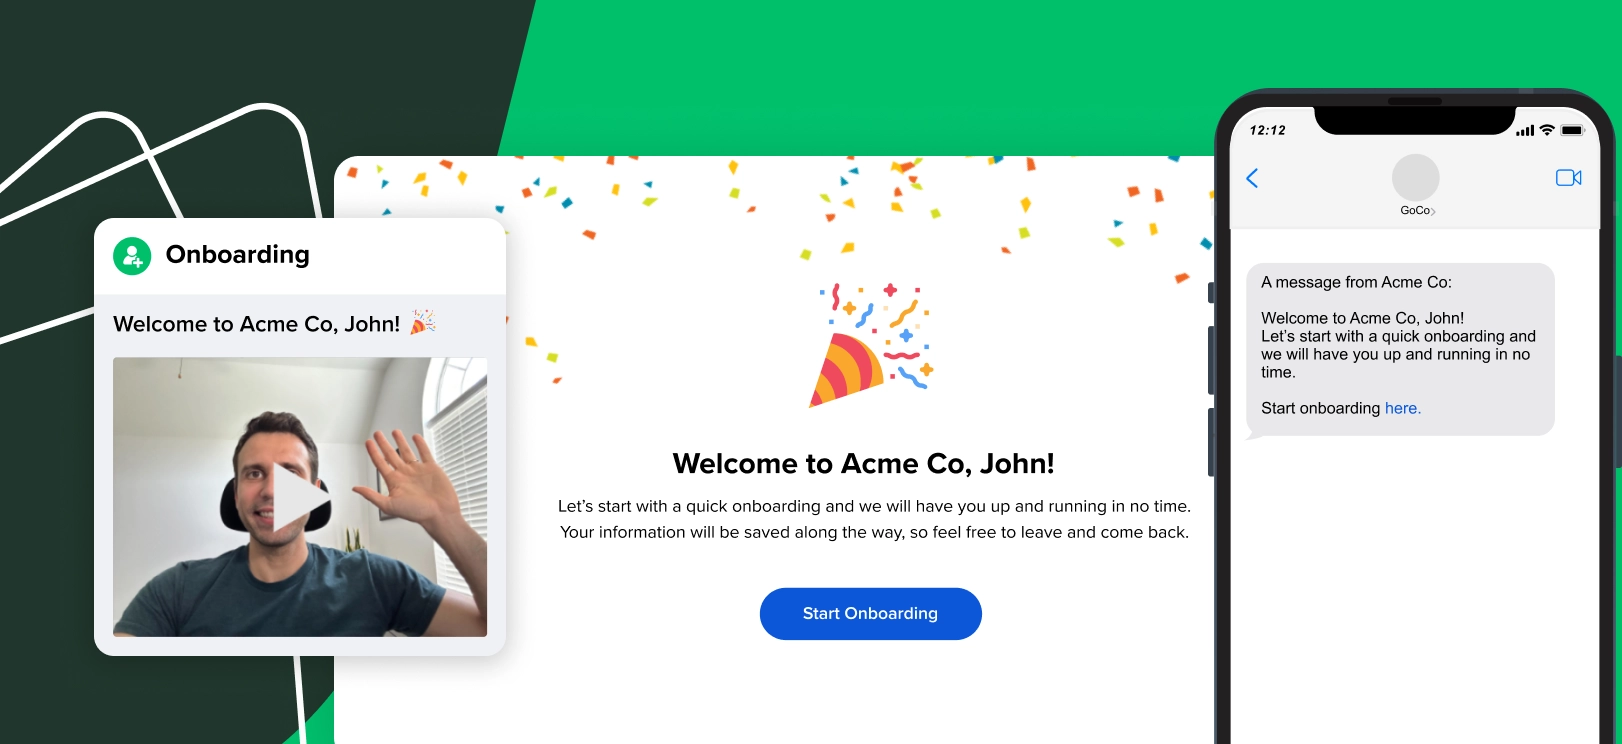 Delight Your New Hires with Our Latest Onboarding Enhancements